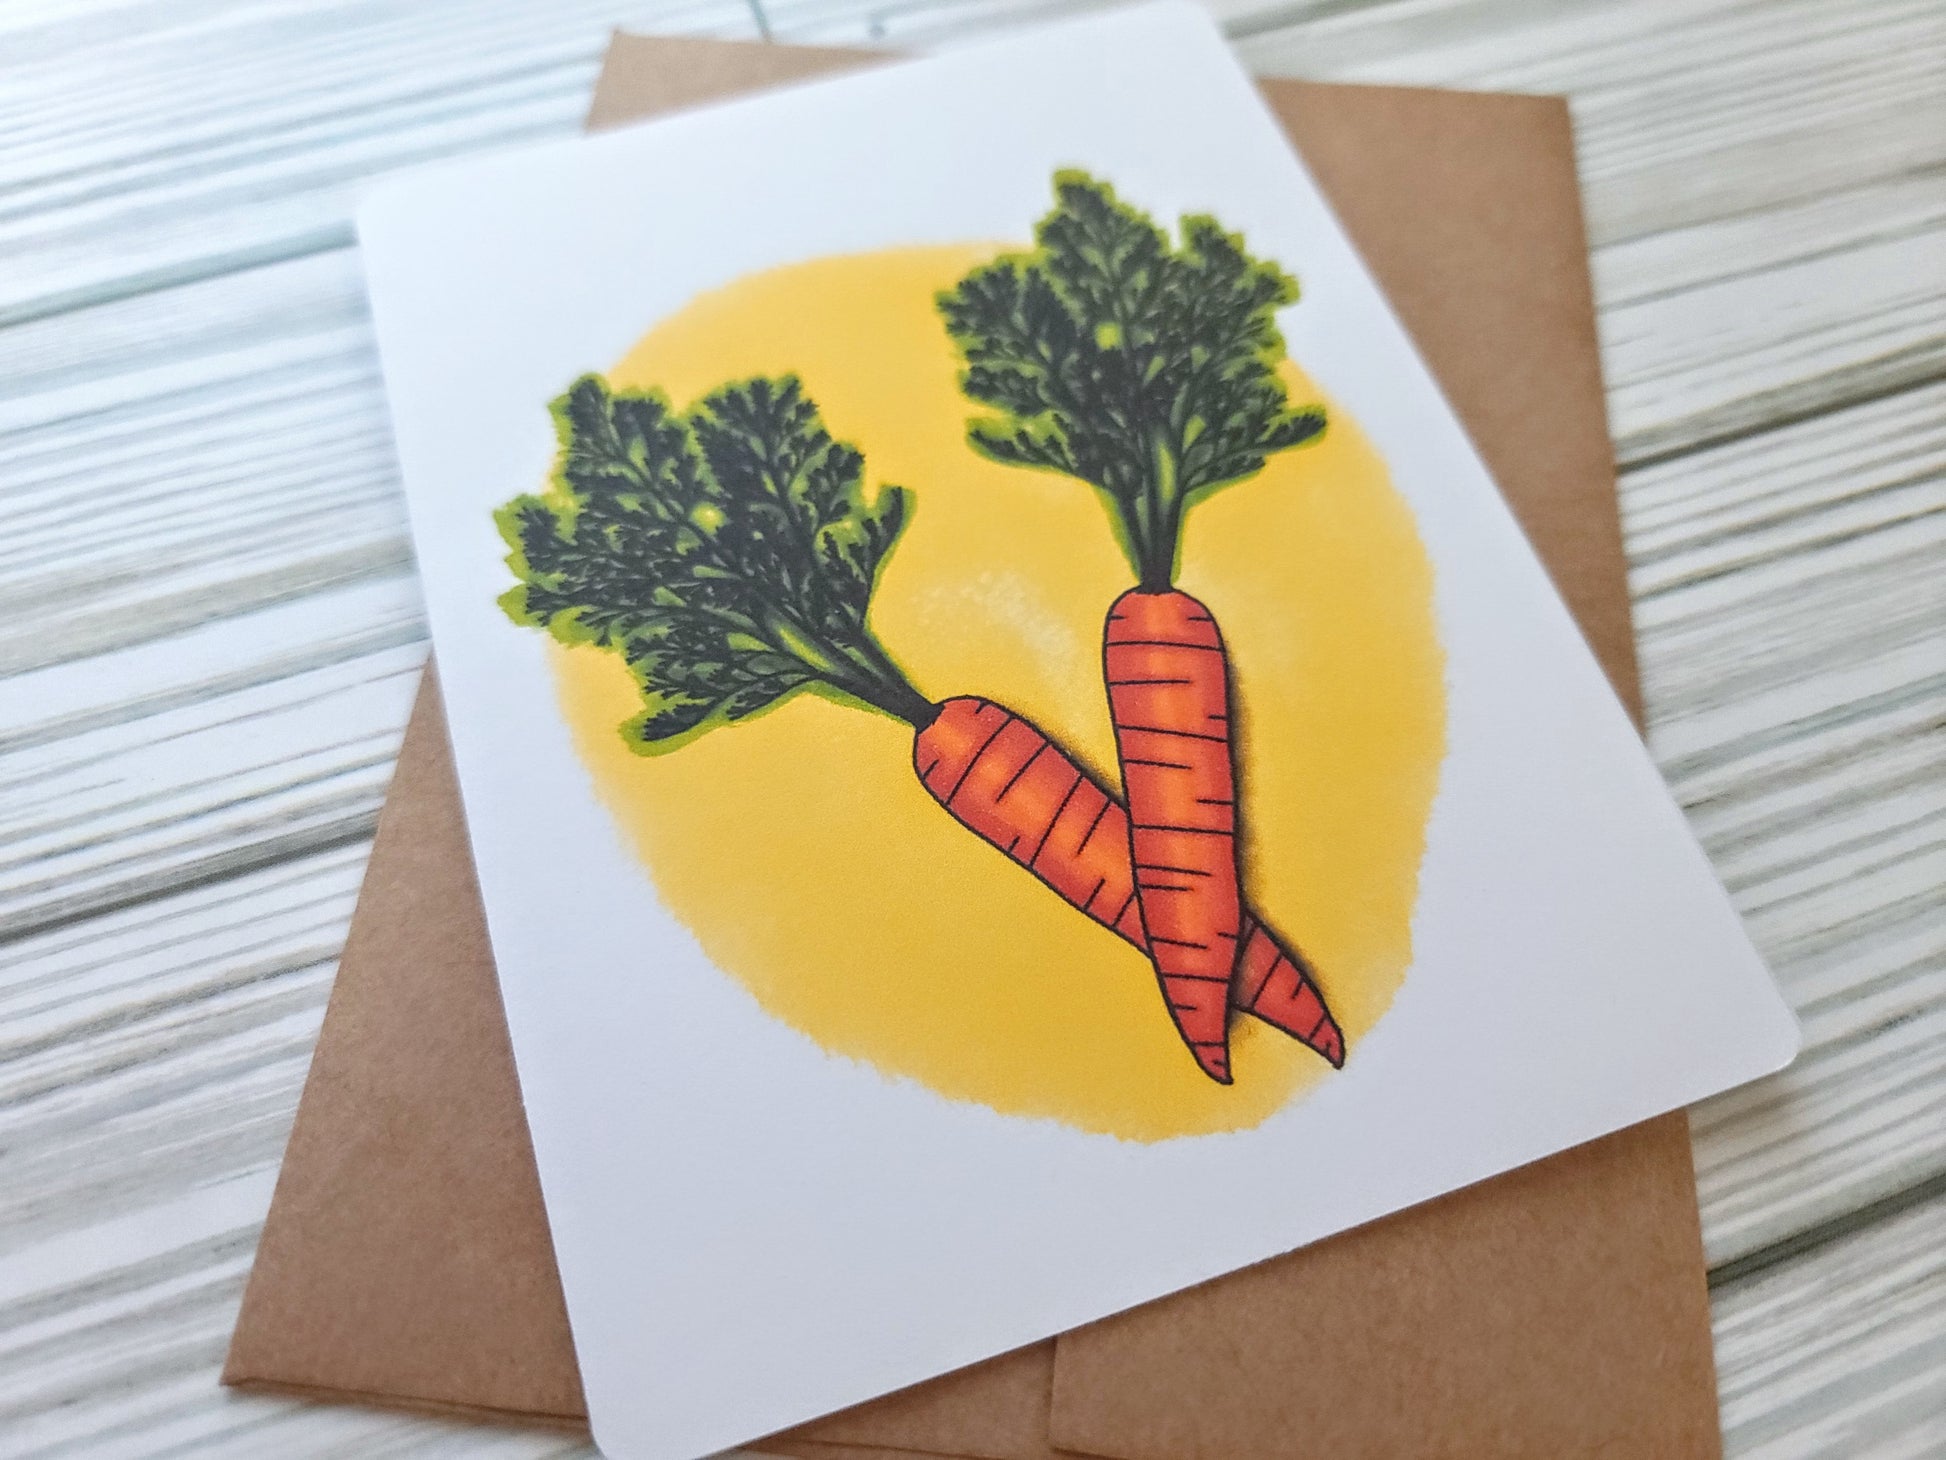 Carrot Handmade Greeting Card - Recycled Paper and Kraft Envelope - Angled Overhead Shot